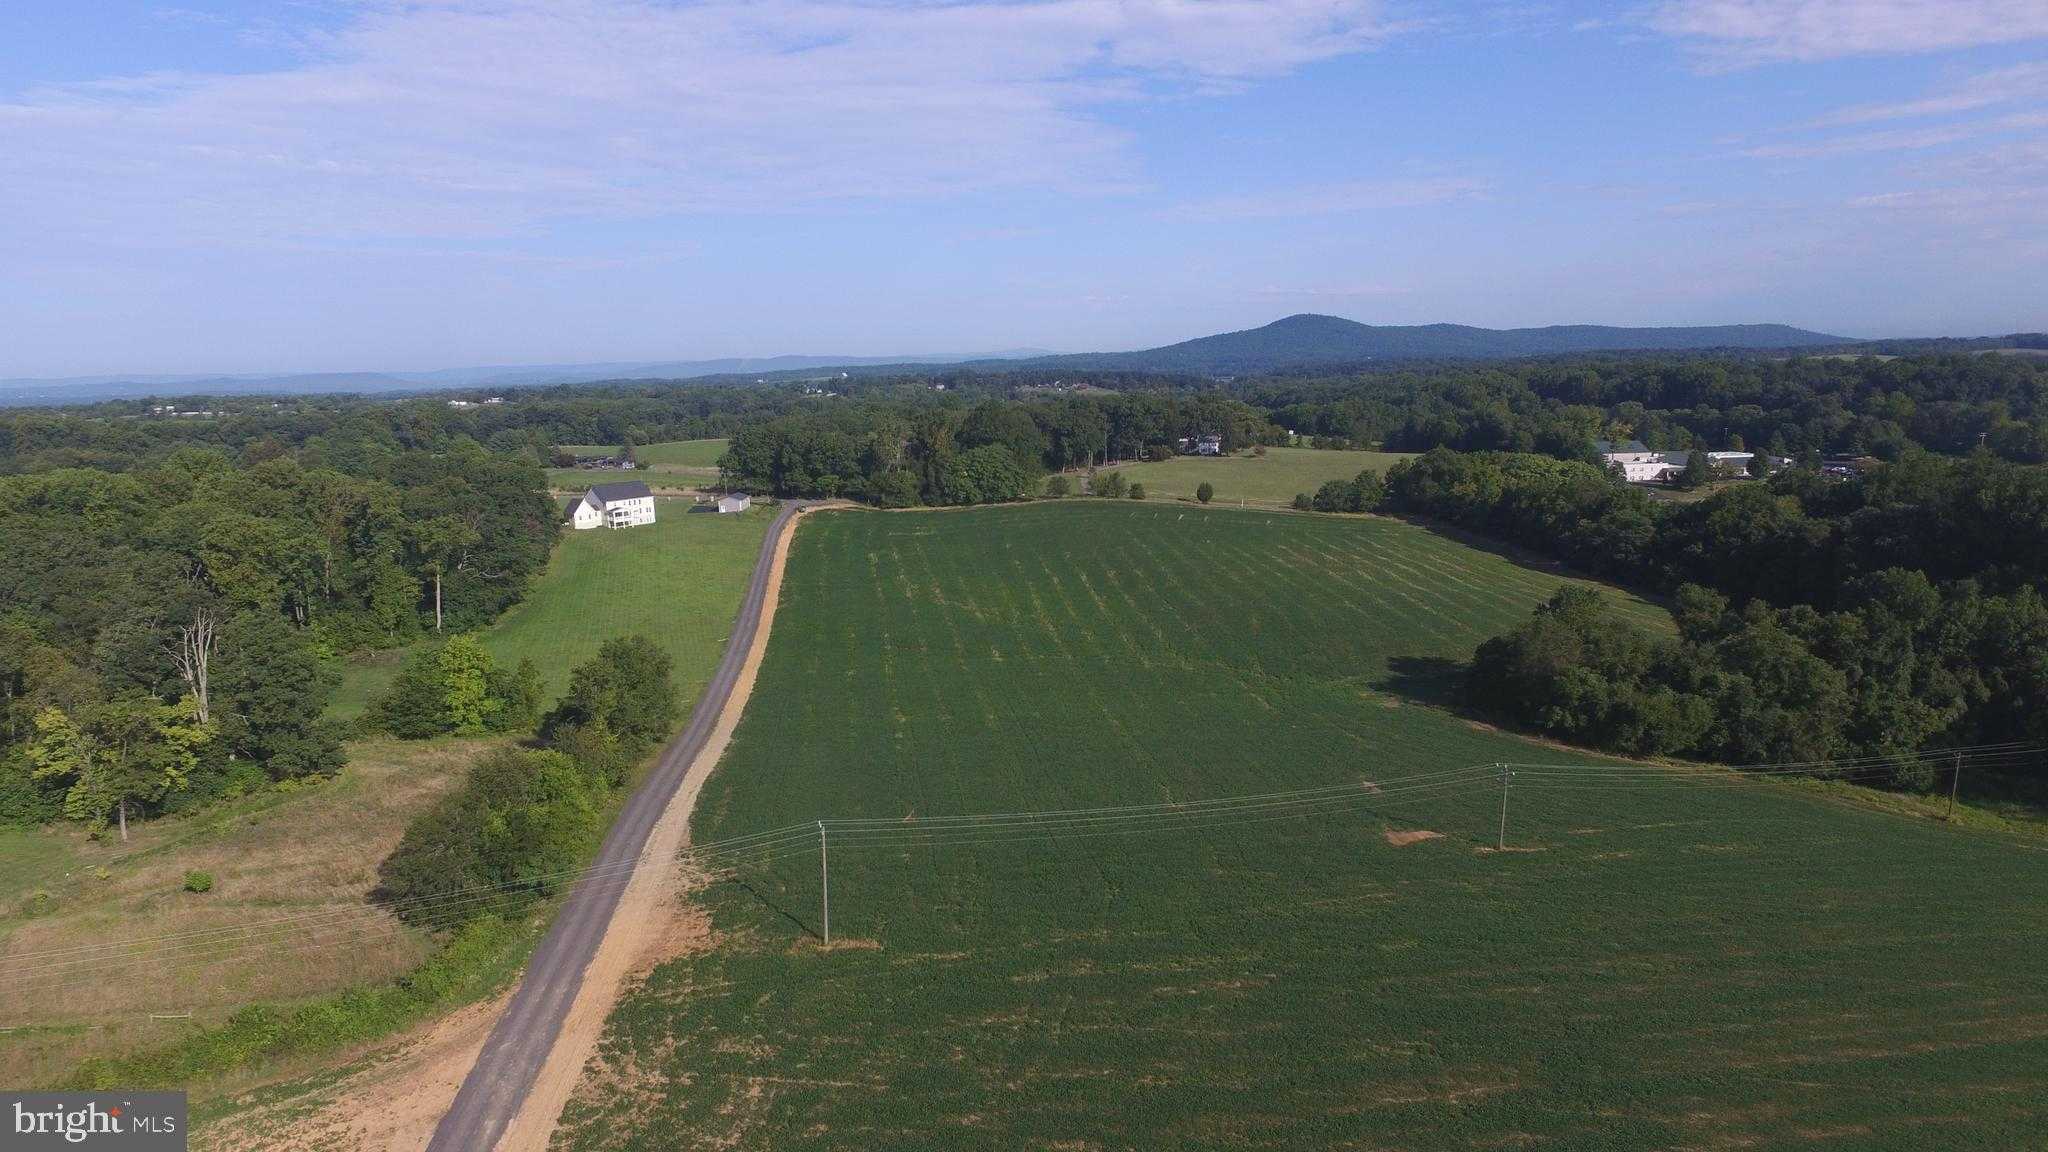 View BOYDS, MD 20841 land